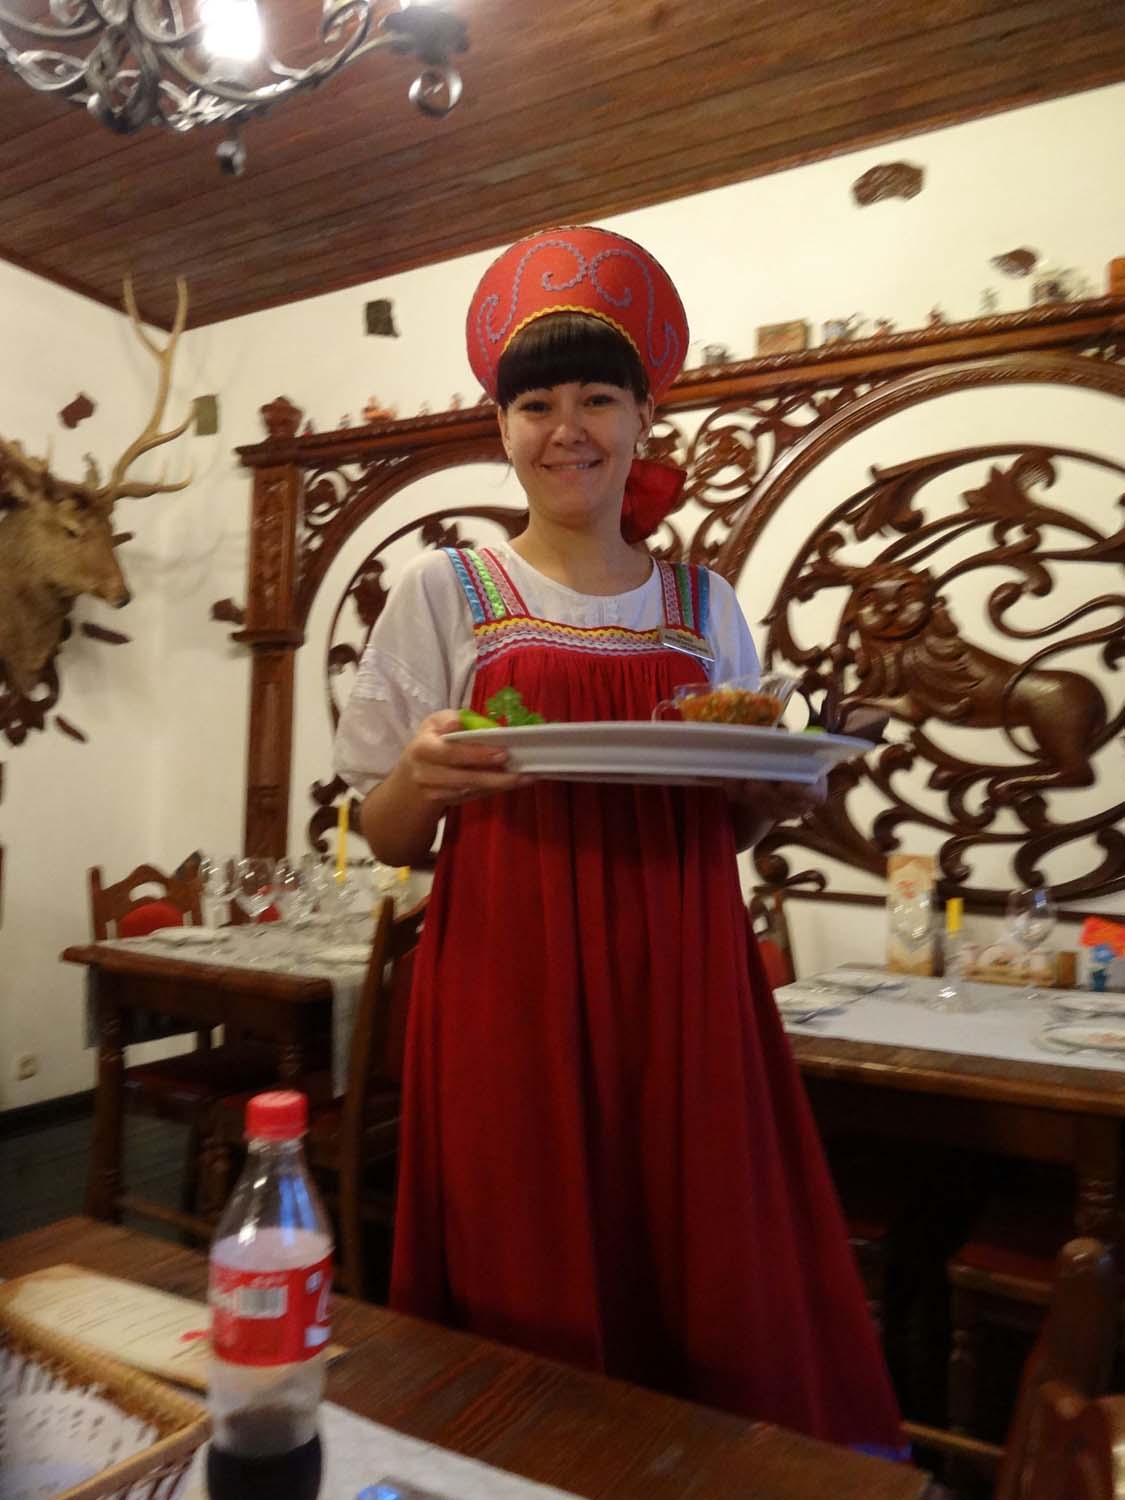 delicious food served in traditional Russian dress